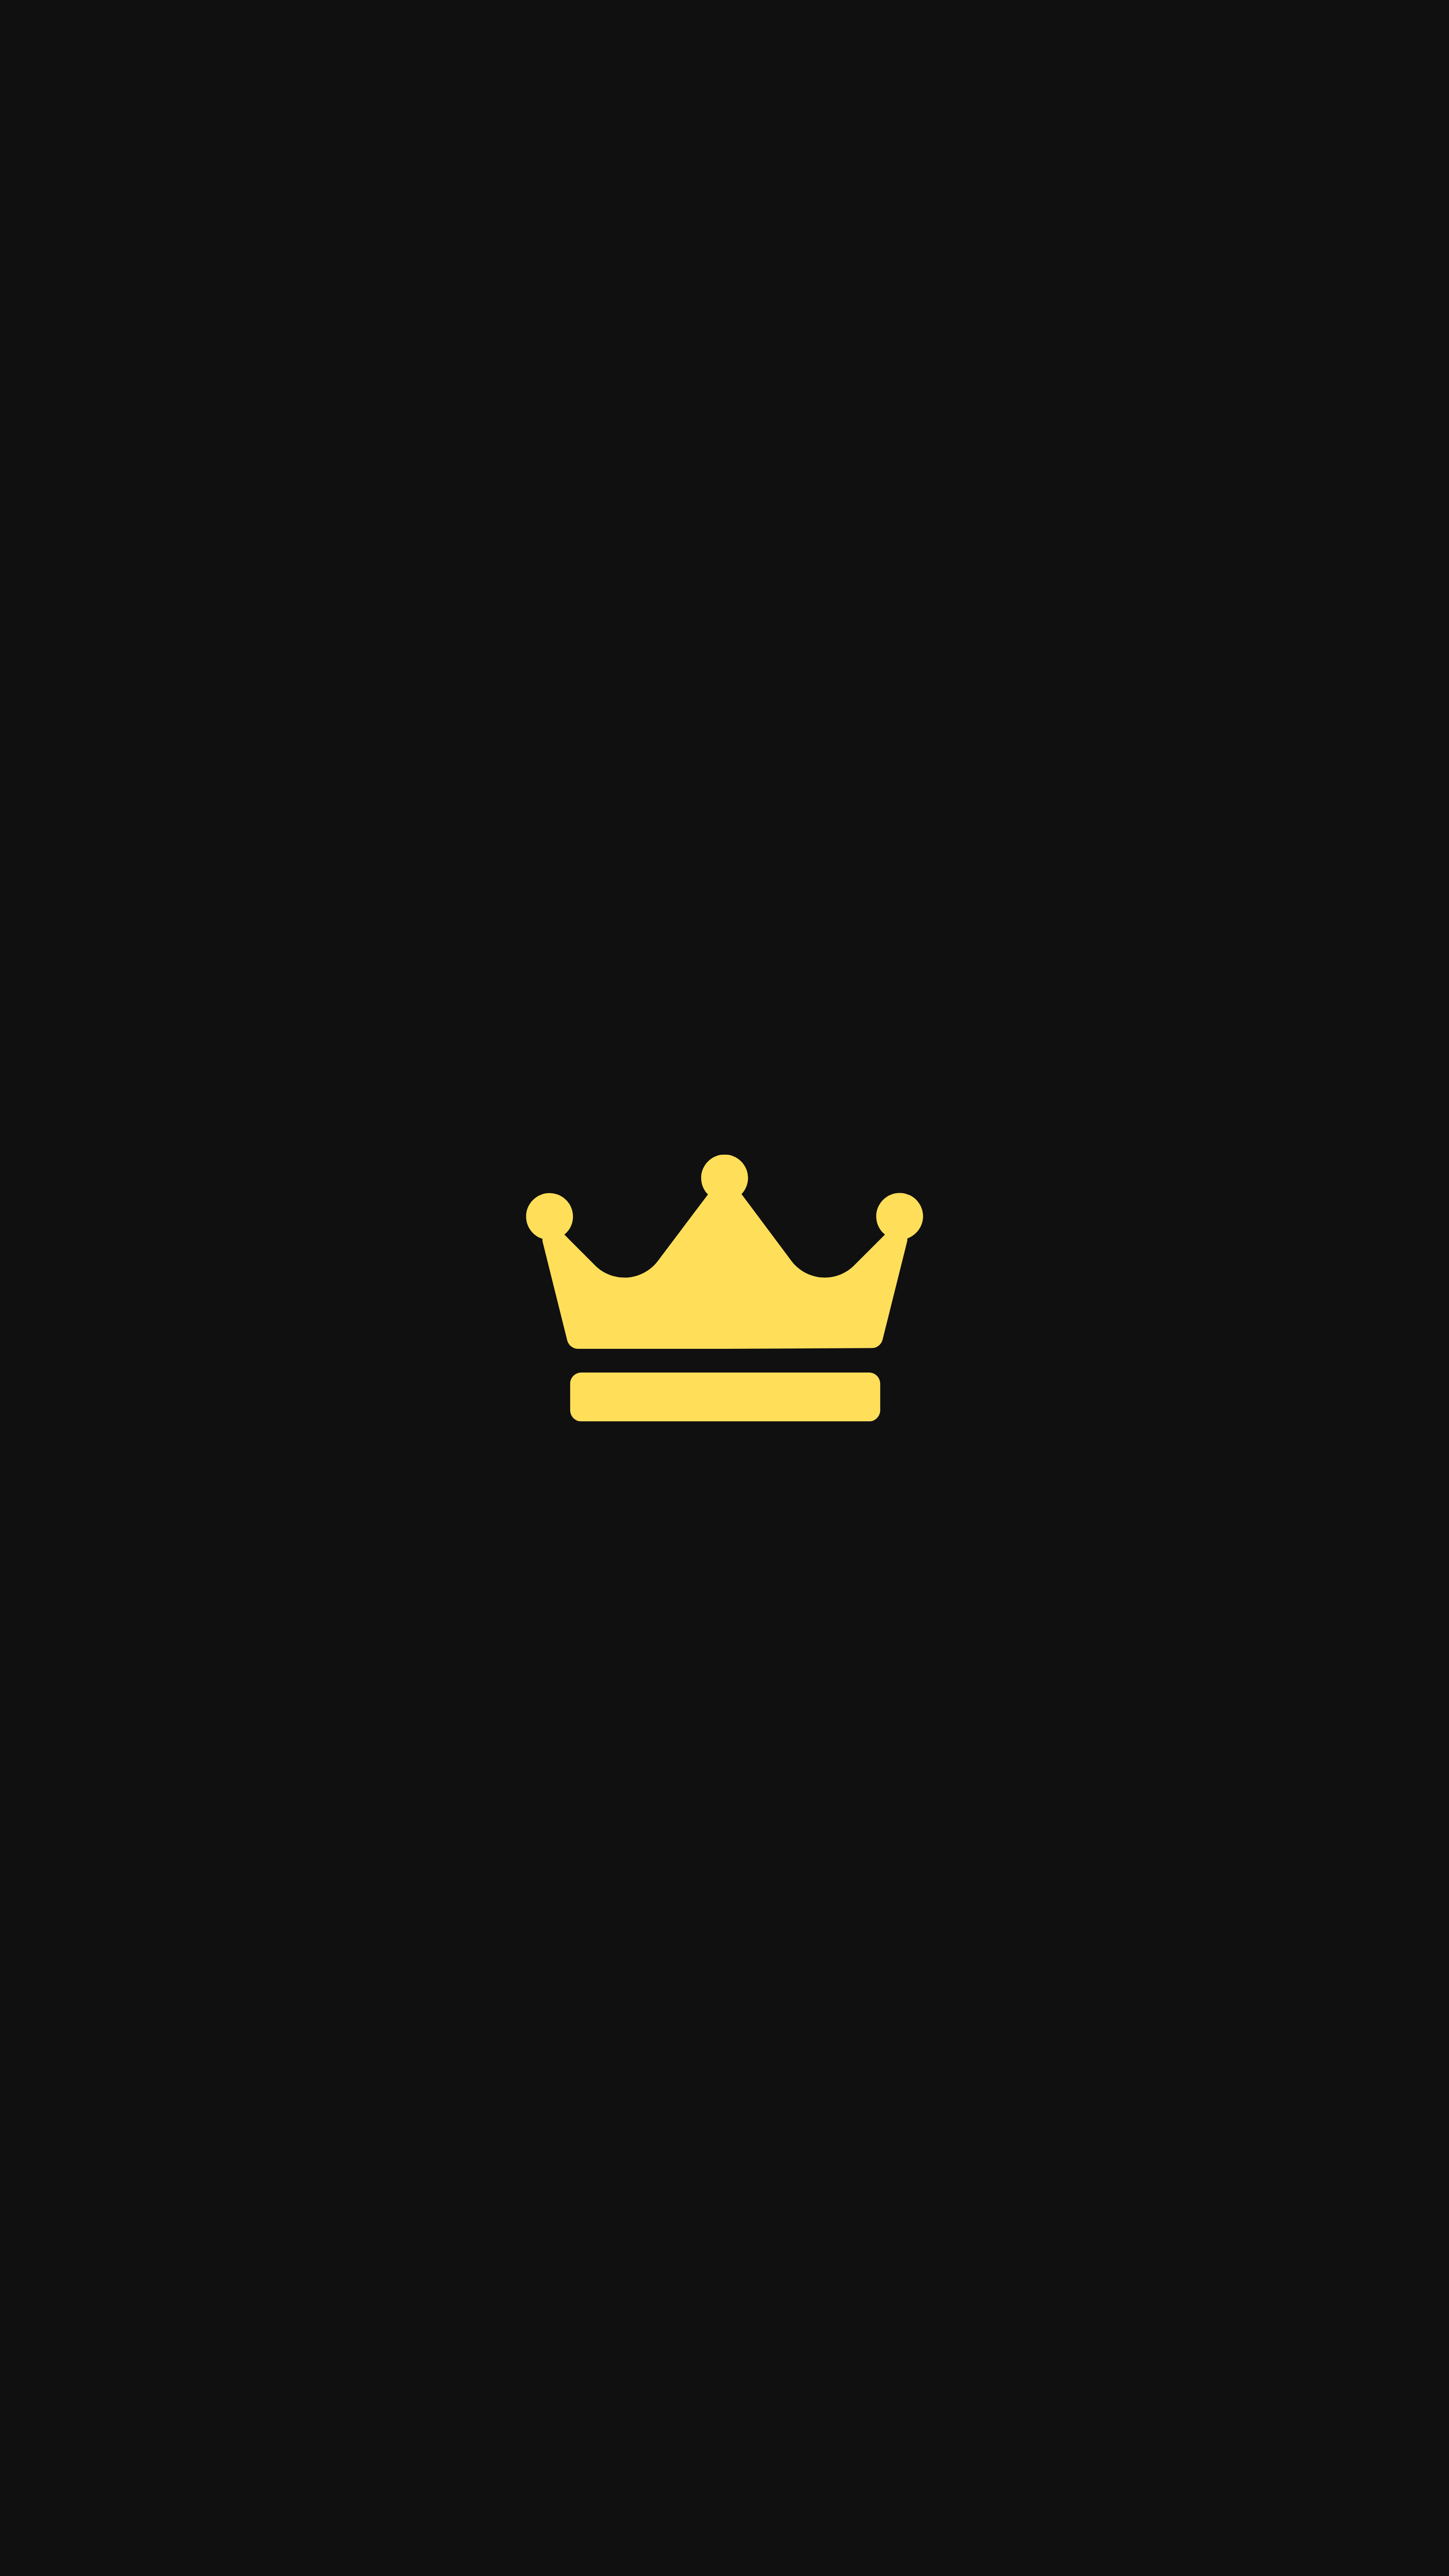 Download Crown wallpaper for mobile phone, free Crown HD picture